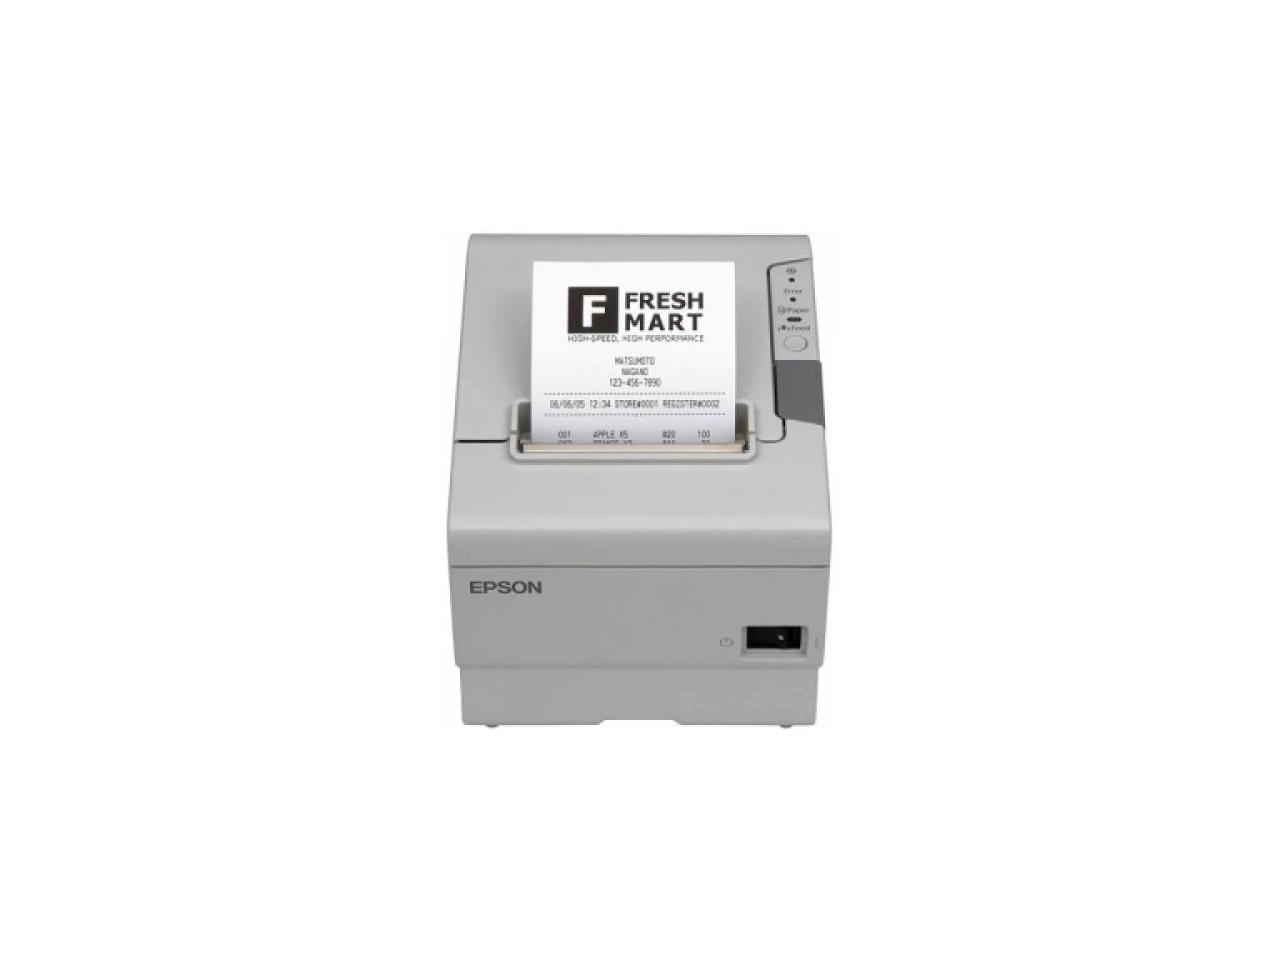 EPSON C31CA85014 TM-T88V THERMAL RECEIPT PRINTER - ENERGY STAR RATED COOL WHITE USB and SERIAL INTERFACES PS-180 POWER SUPPLY REQUIRES A CABLE